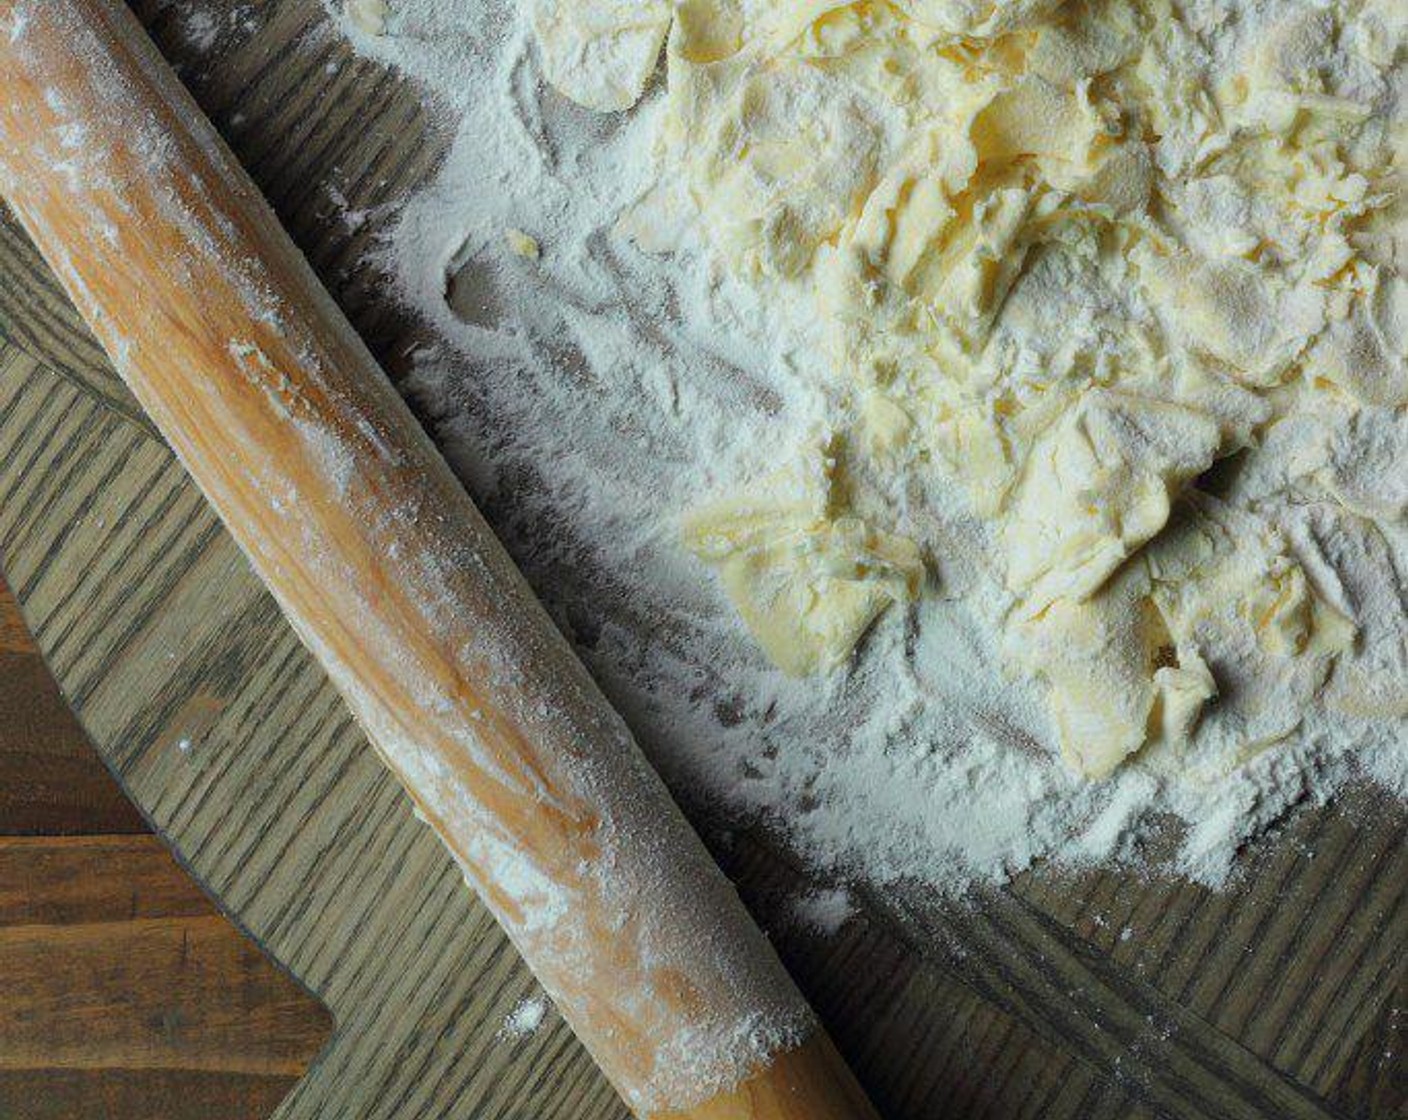 step 4 With a rolling pin, roll the butter cubes until they are all flat, distributing flour on top as necessary.